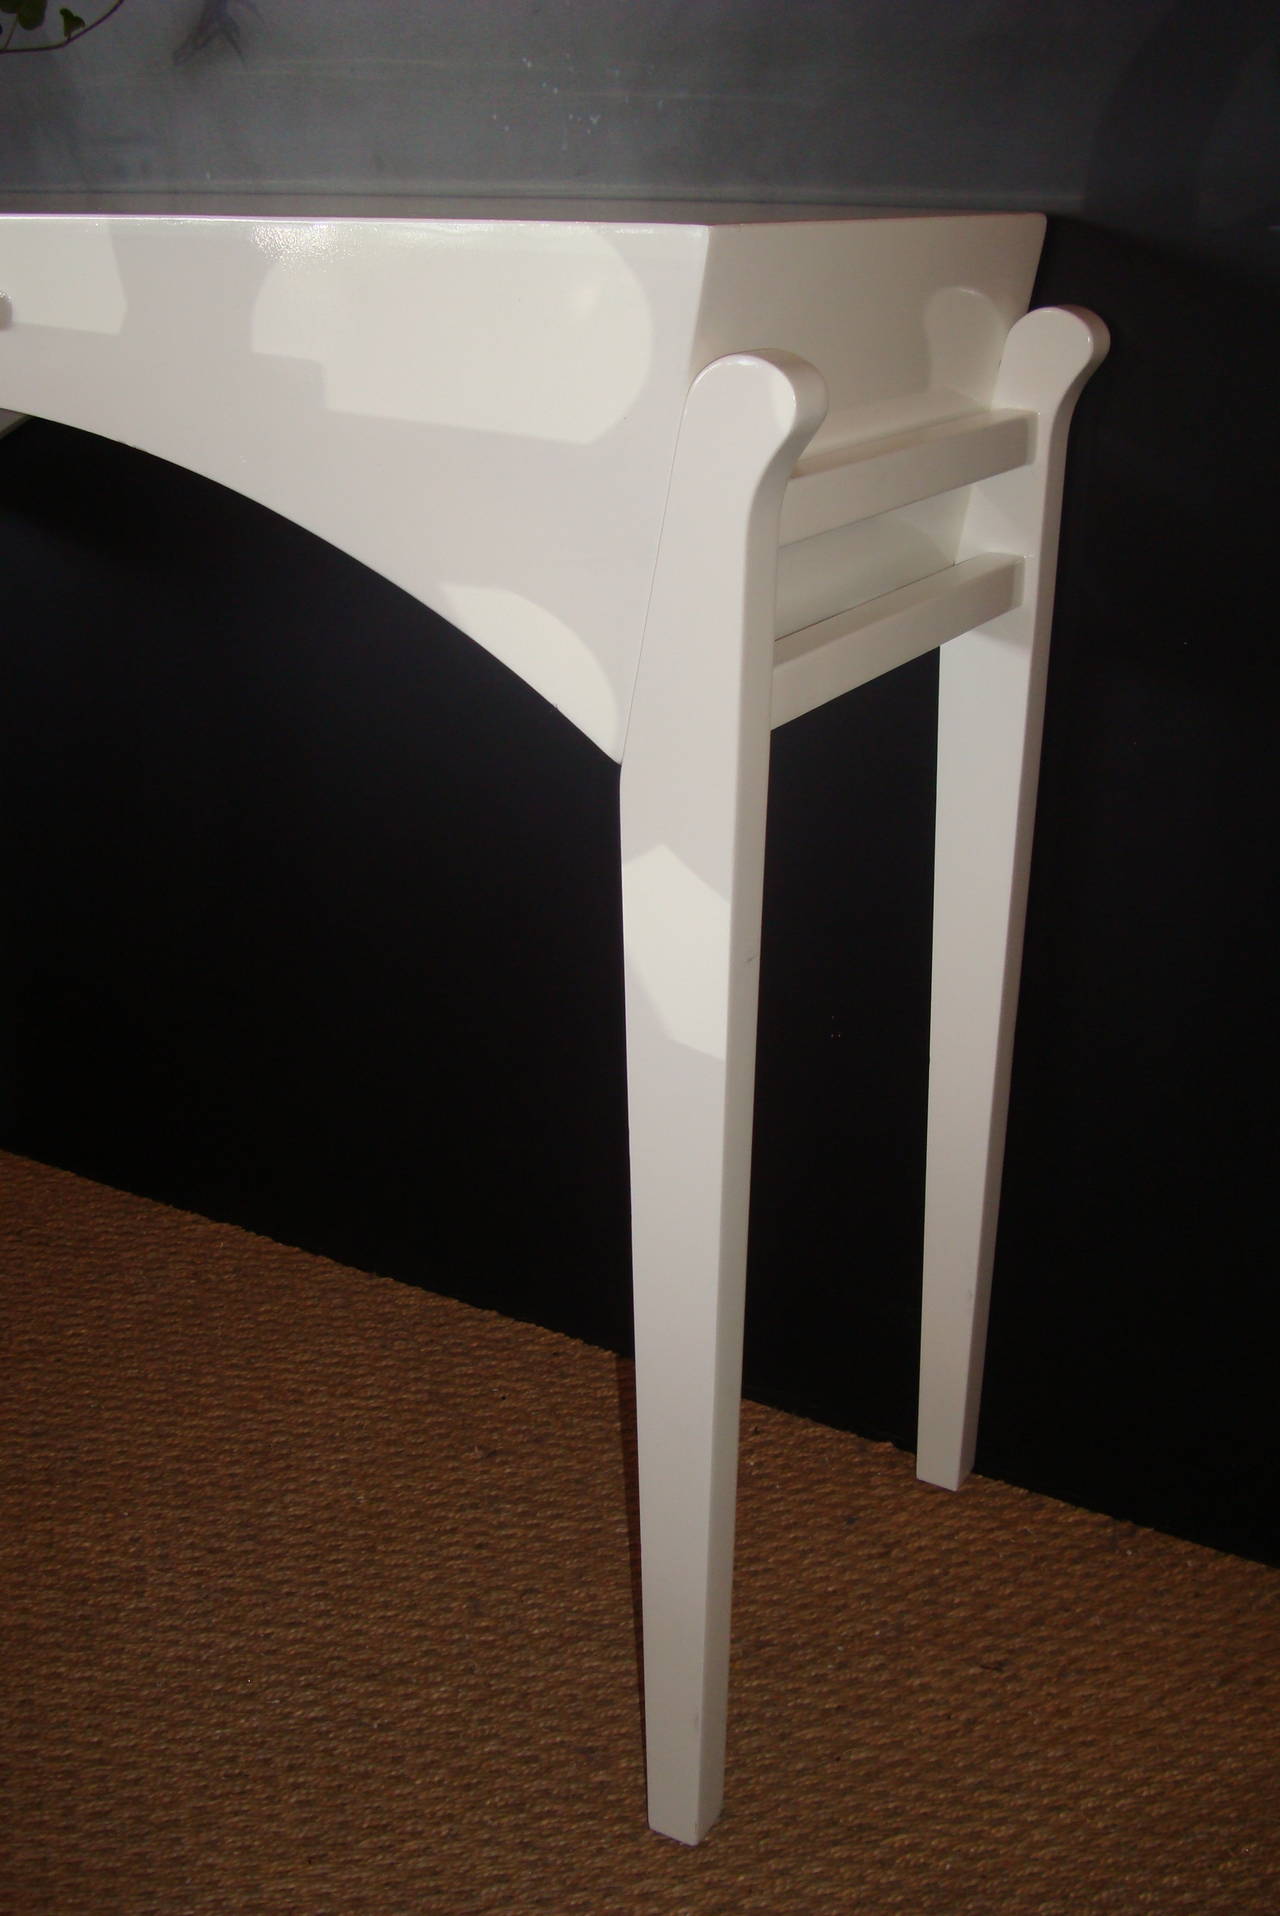 Newly Lacquered White Gloss Vintage Vanity, Console or Writing Desk. Decorative Moderne Curve Silhouette